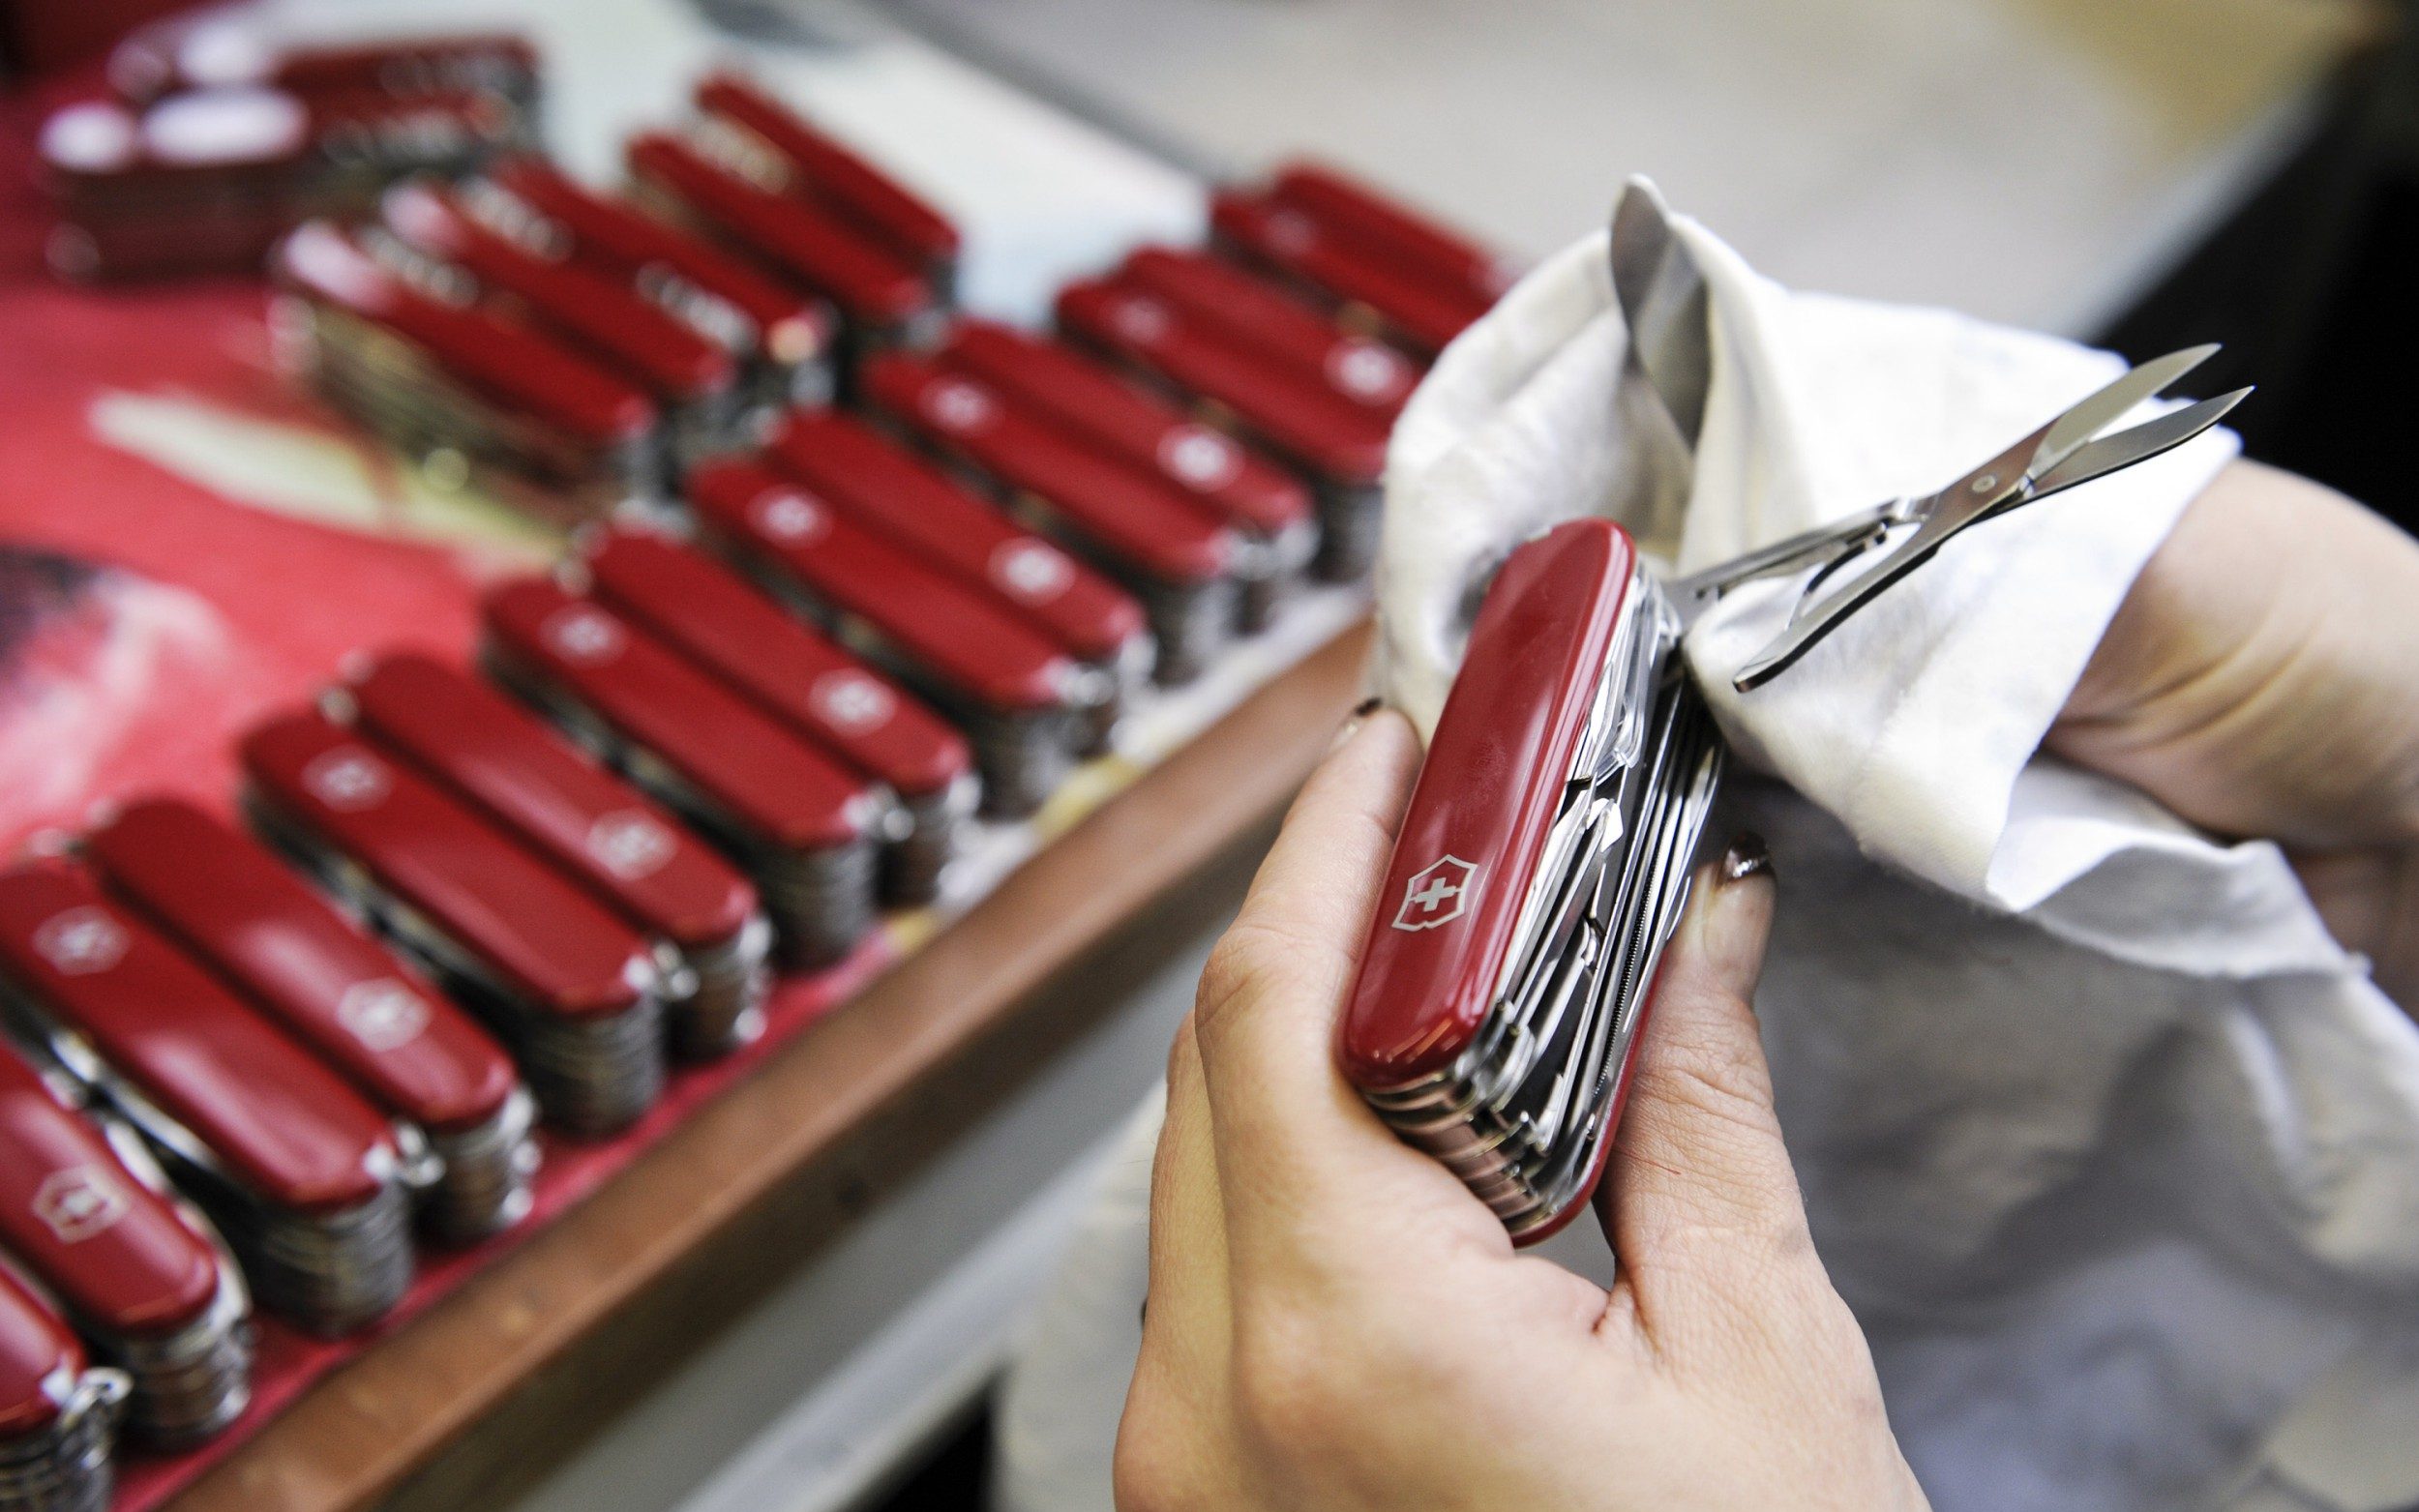 new swiss army knife being developed – without the knife